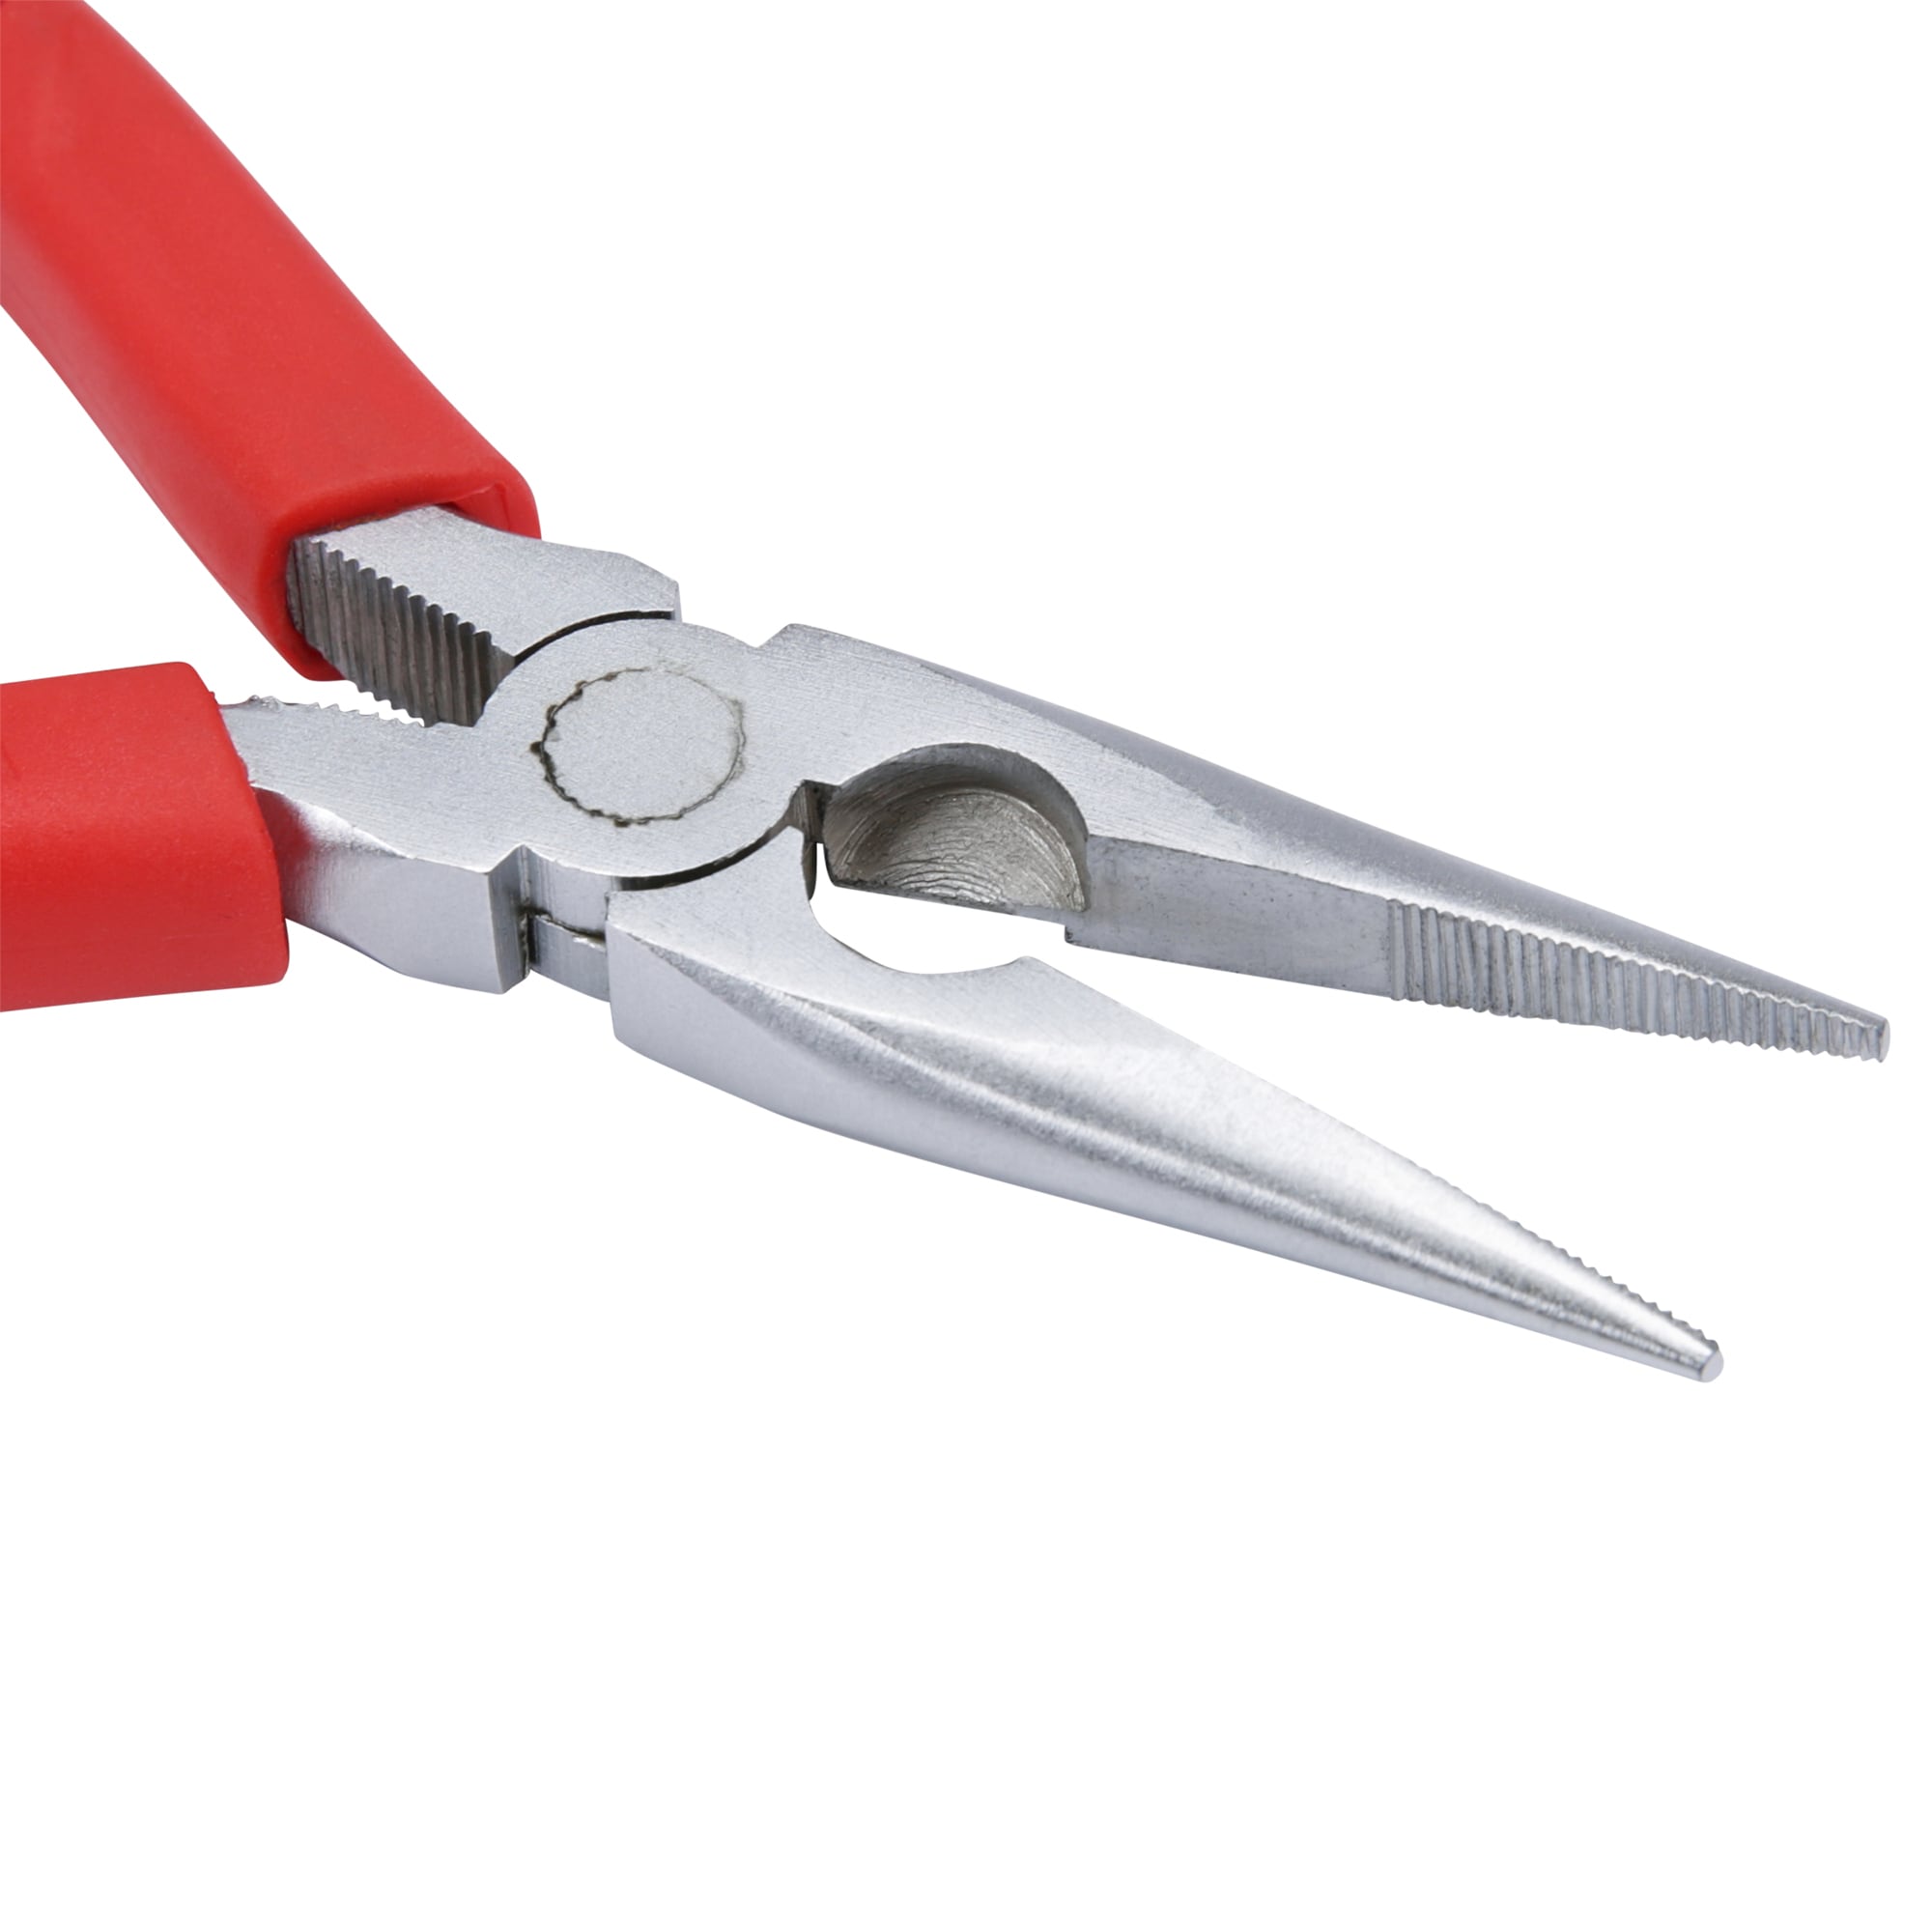 WORKPRO 6-in Home Repair Needle Nose Pliers with Wire Cutter in